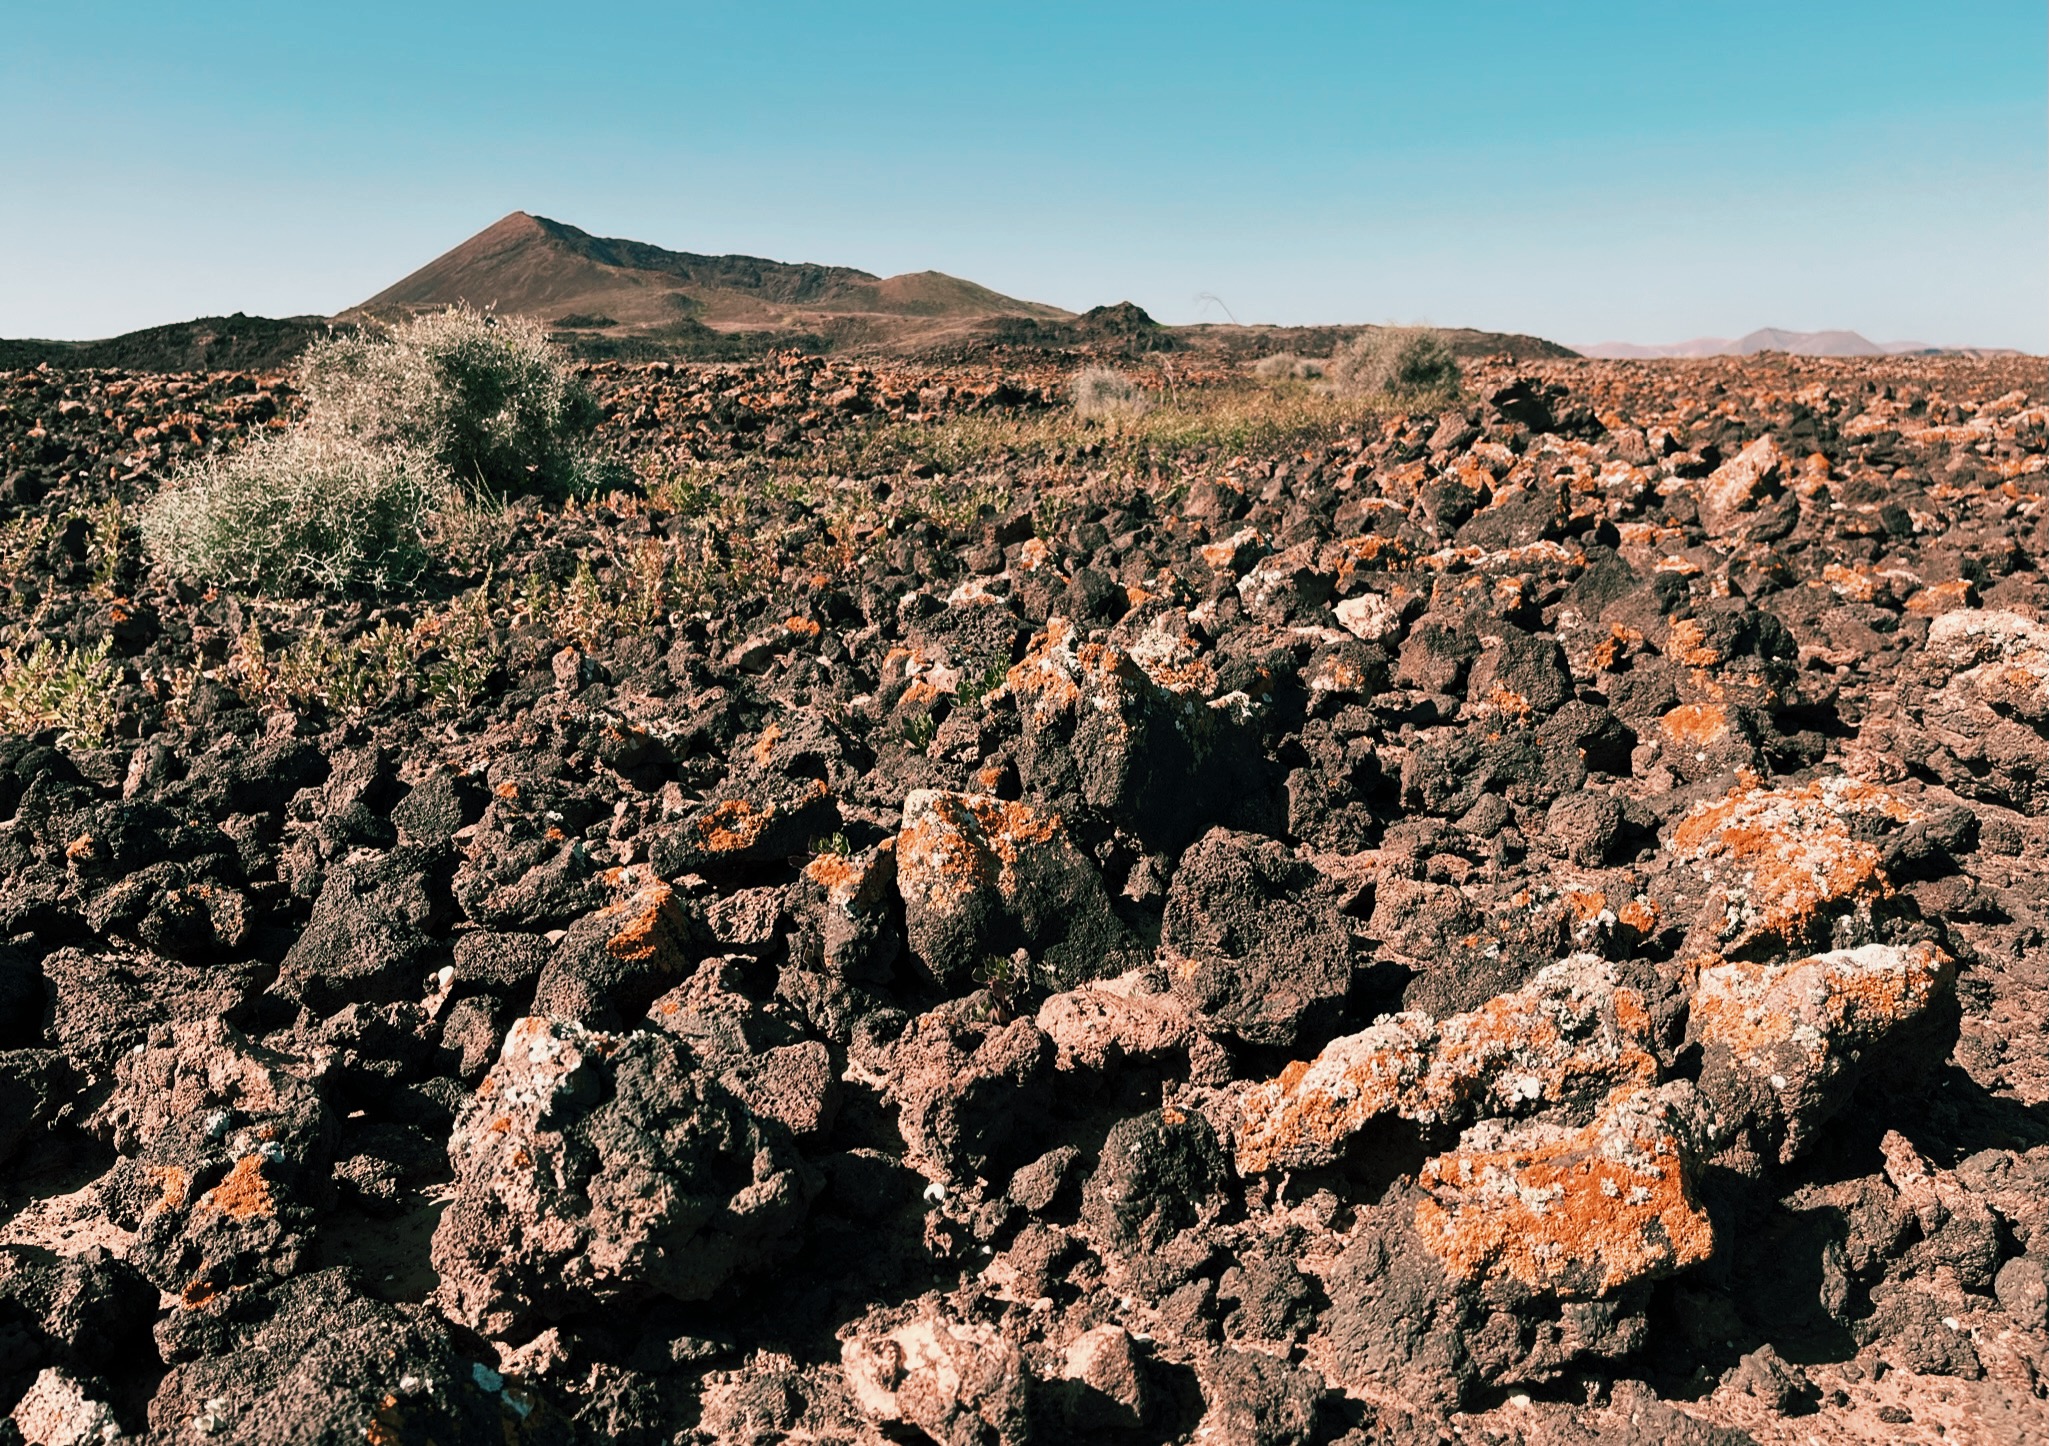 Lots of volcanic stones and gravel in hues of brown and orange leading to Caldera Los Arrabales, a hiking route on Fuerteventura